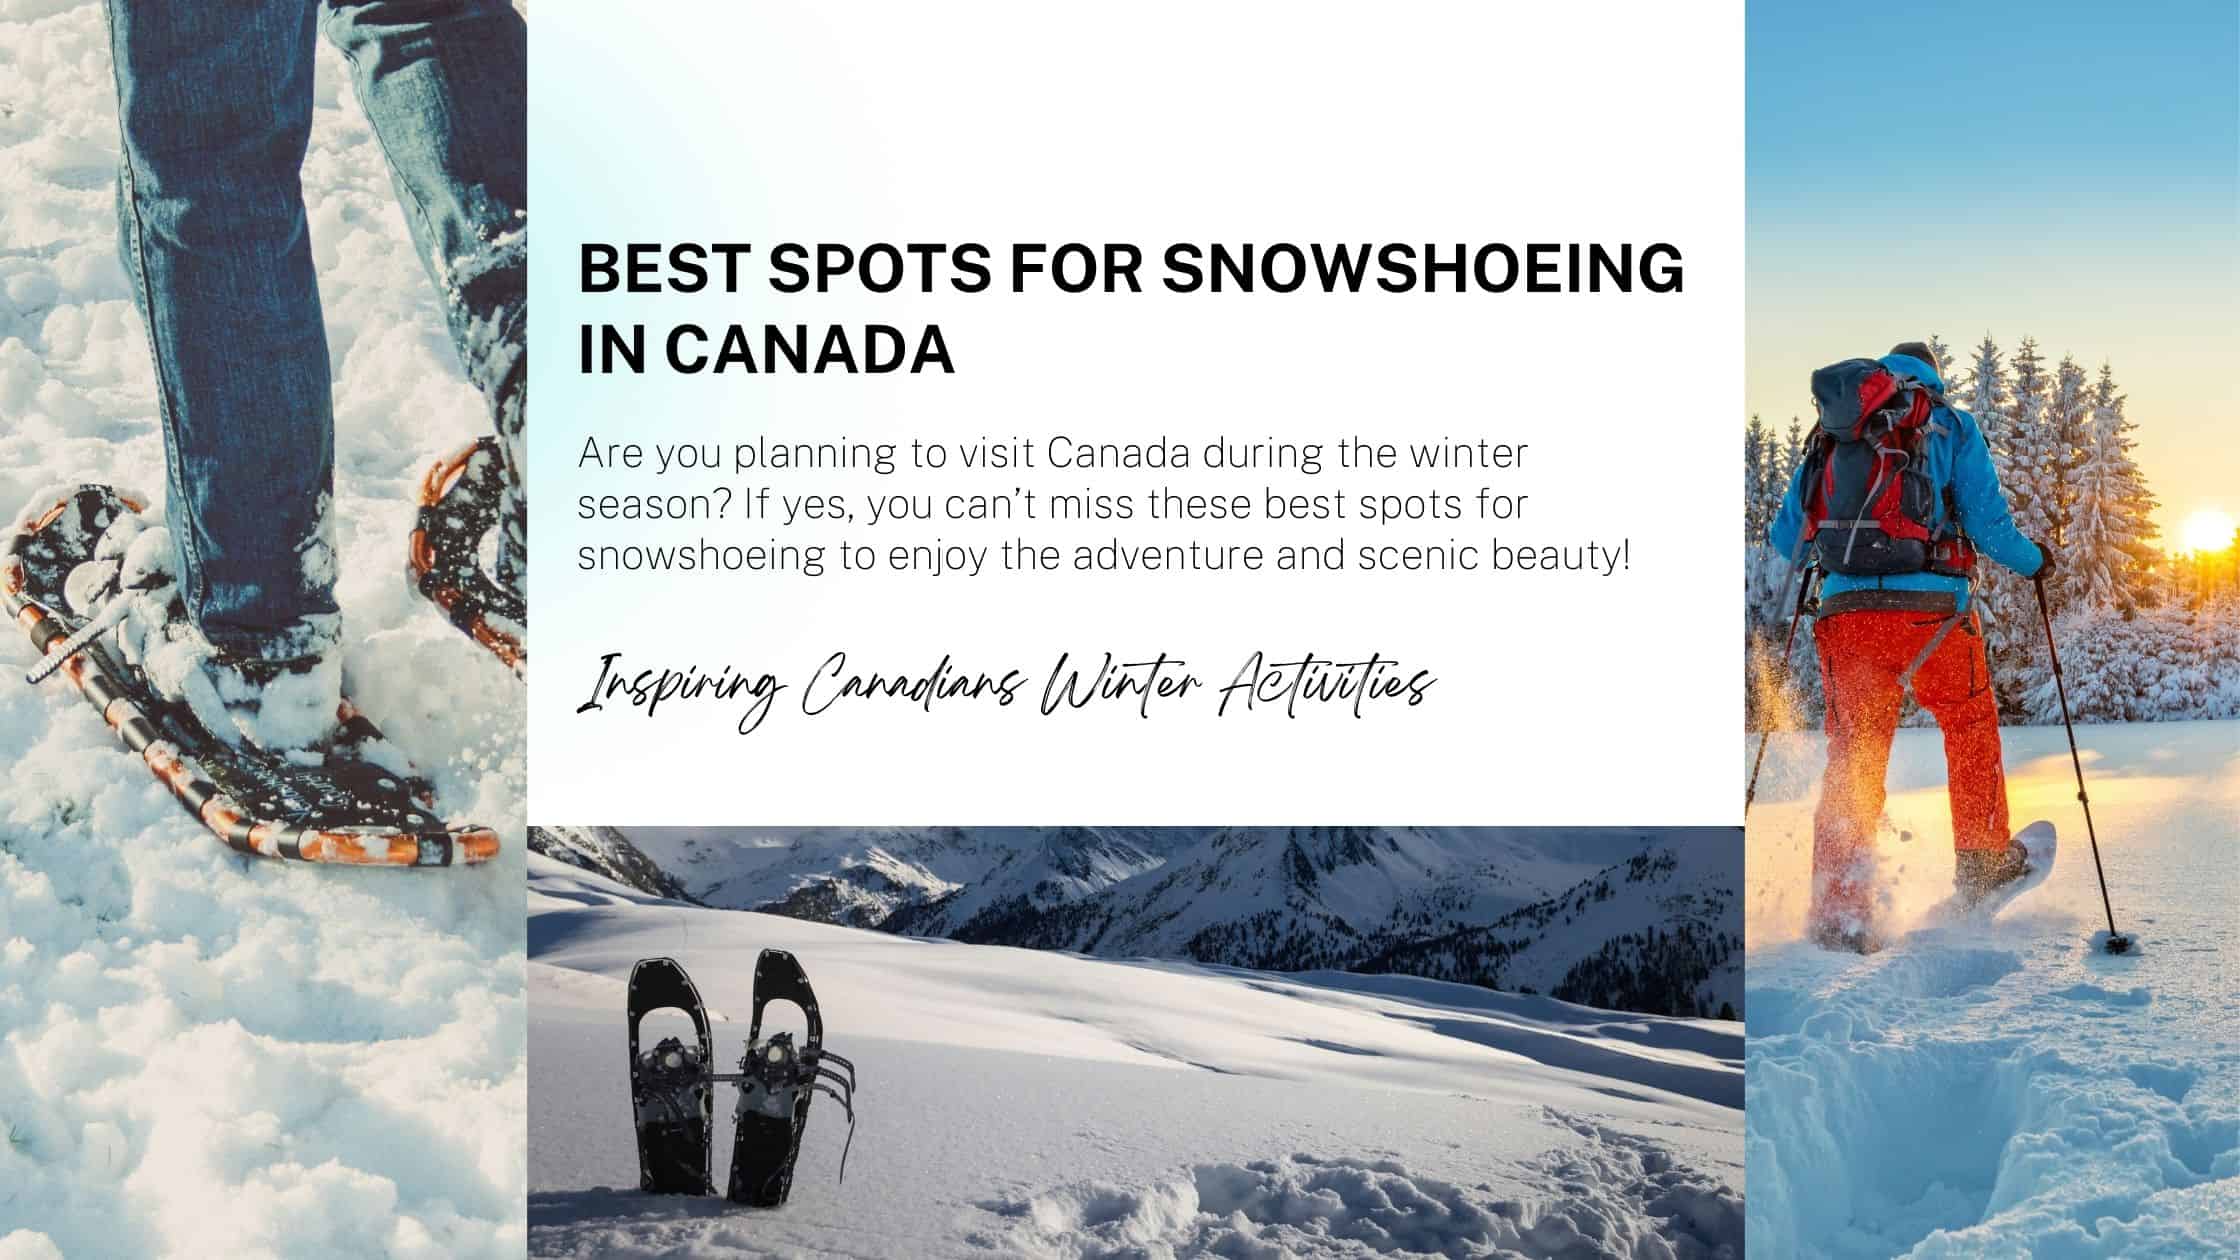 Are you planning to visit Canada during the winter season? If yes, you can’t miss these best spots for snowshoeing to enjoy the adventure and scenic beauty!